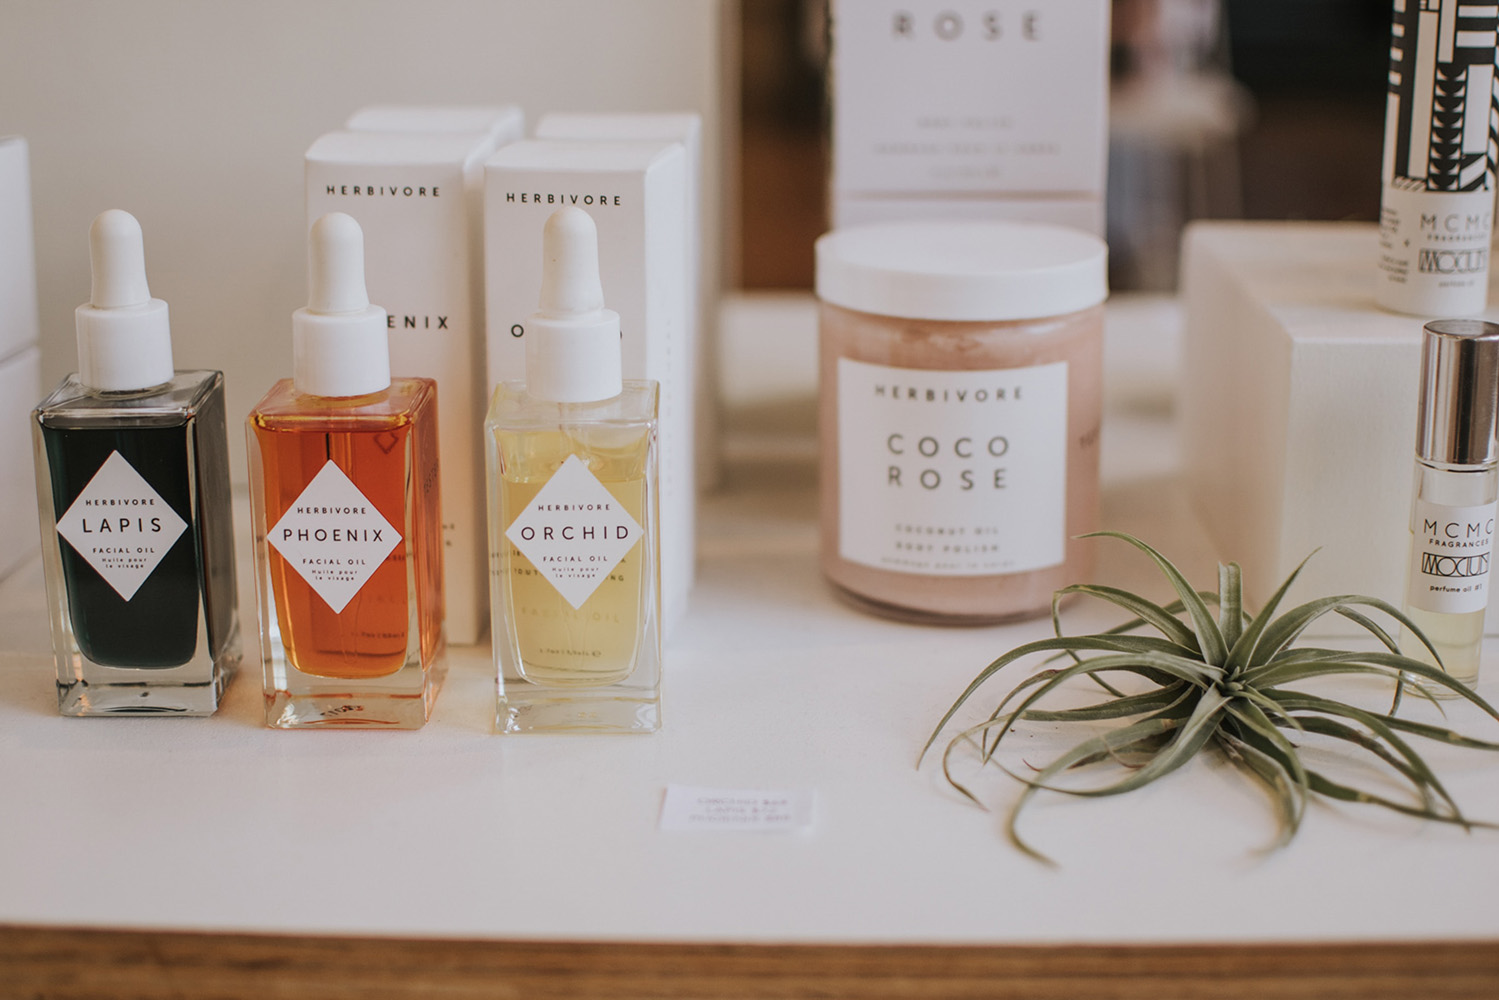 Where Clean Beauty Meets Under One Roof